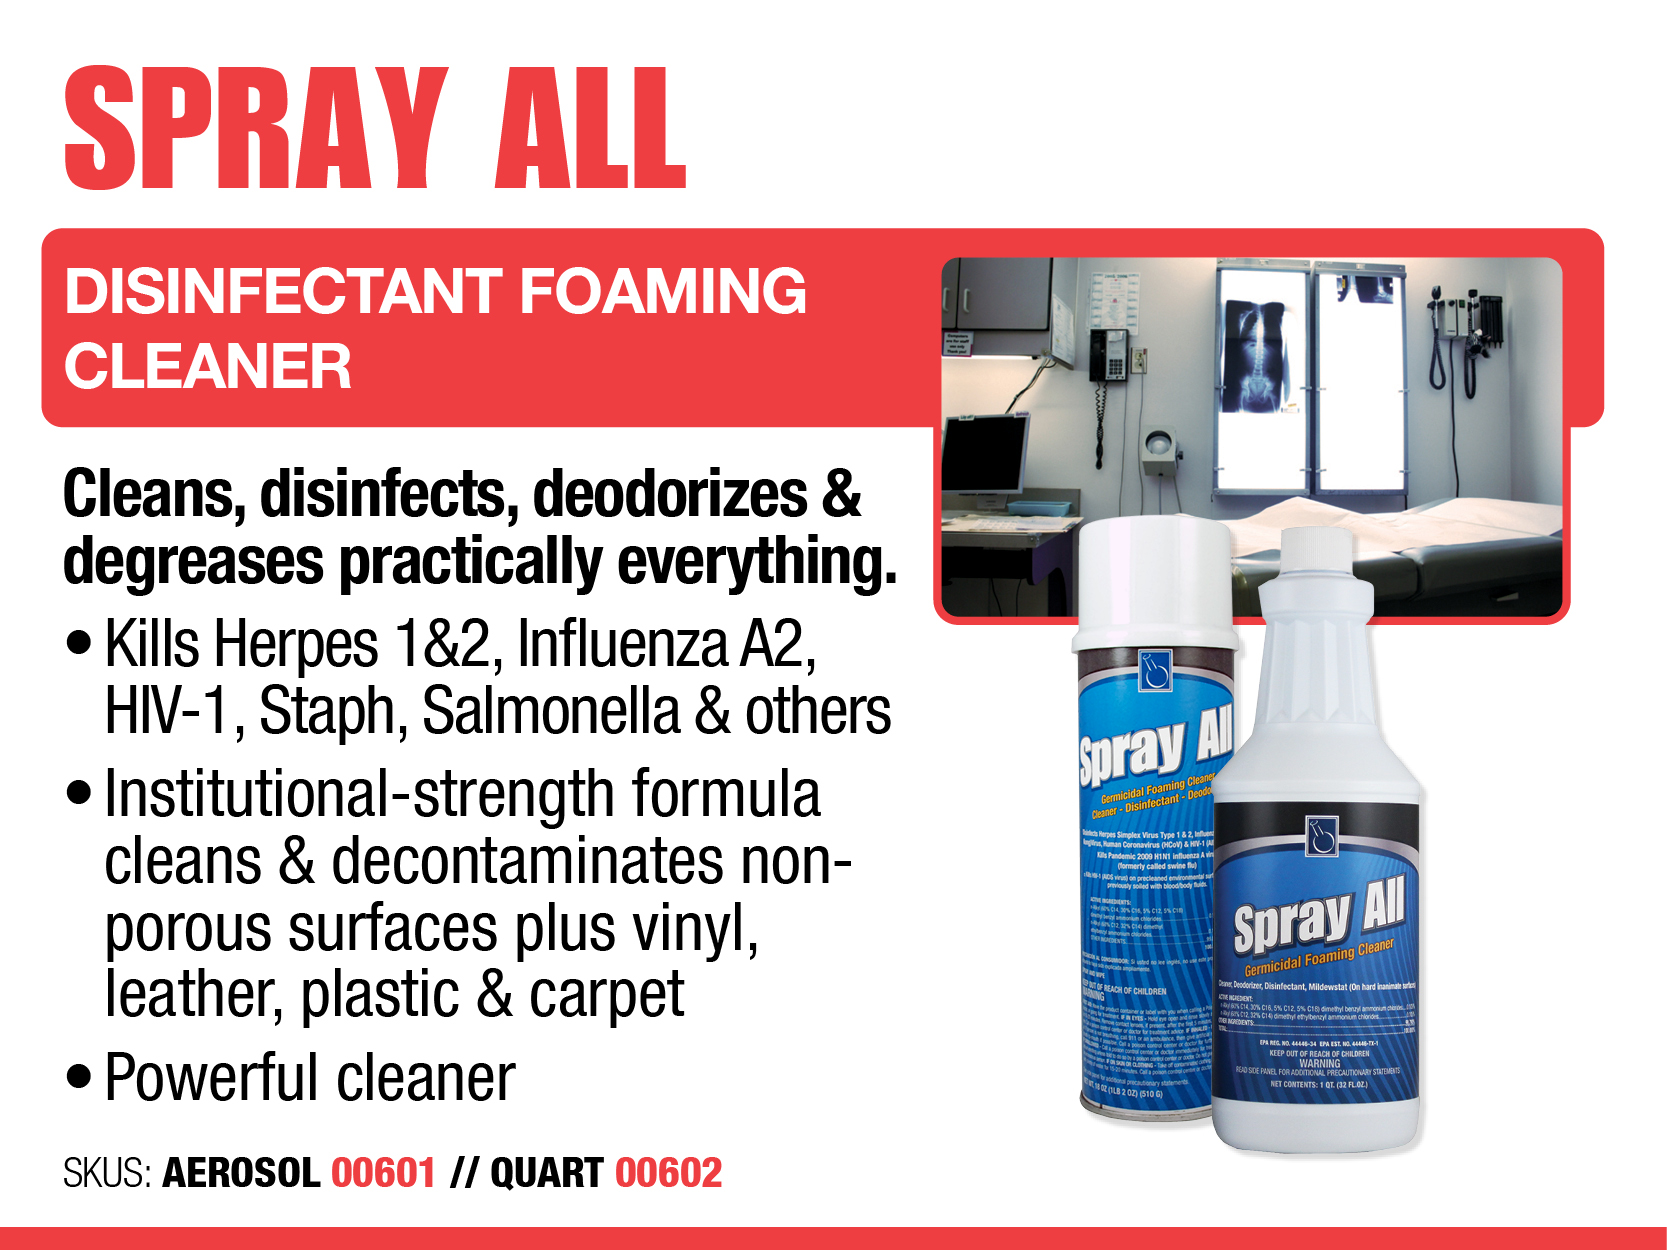 Spray All - Foaming Cleaner - Cold and Flu Prevention - Deodorize, Disinfect, Kill COVID-19